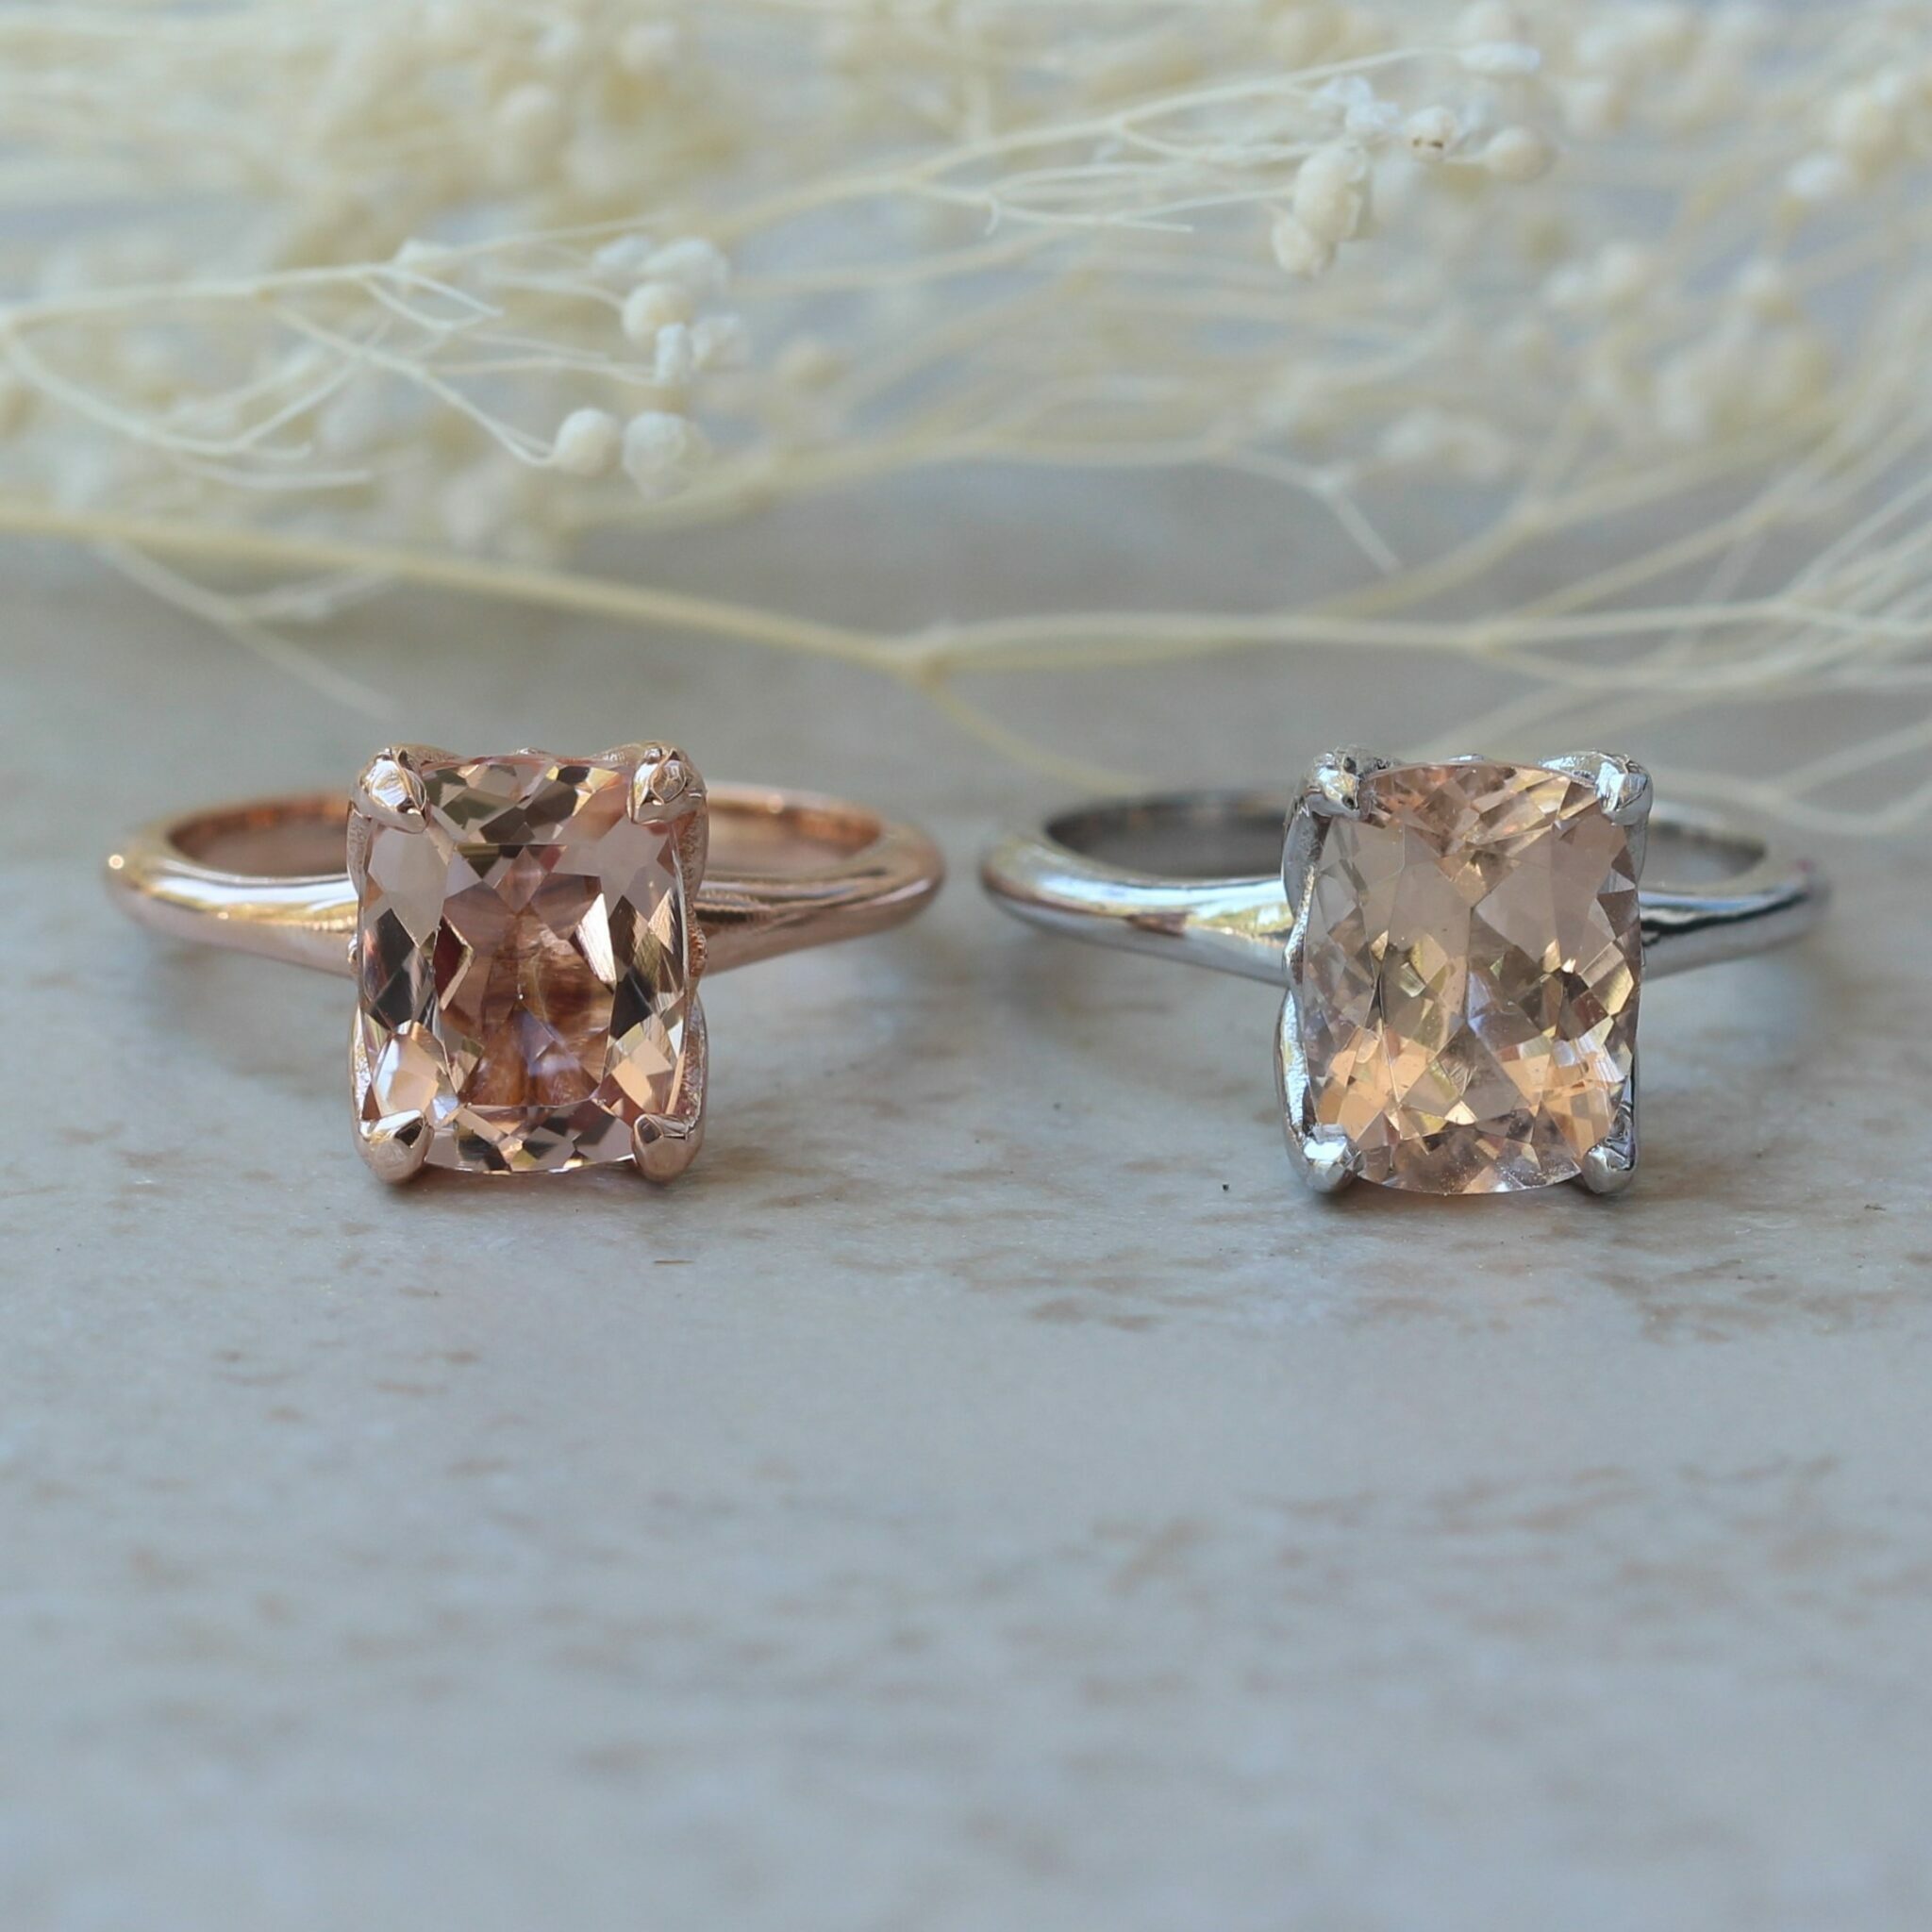 How-does-Morganite-look-in-rose-gold-versus-white-gold-LS5864